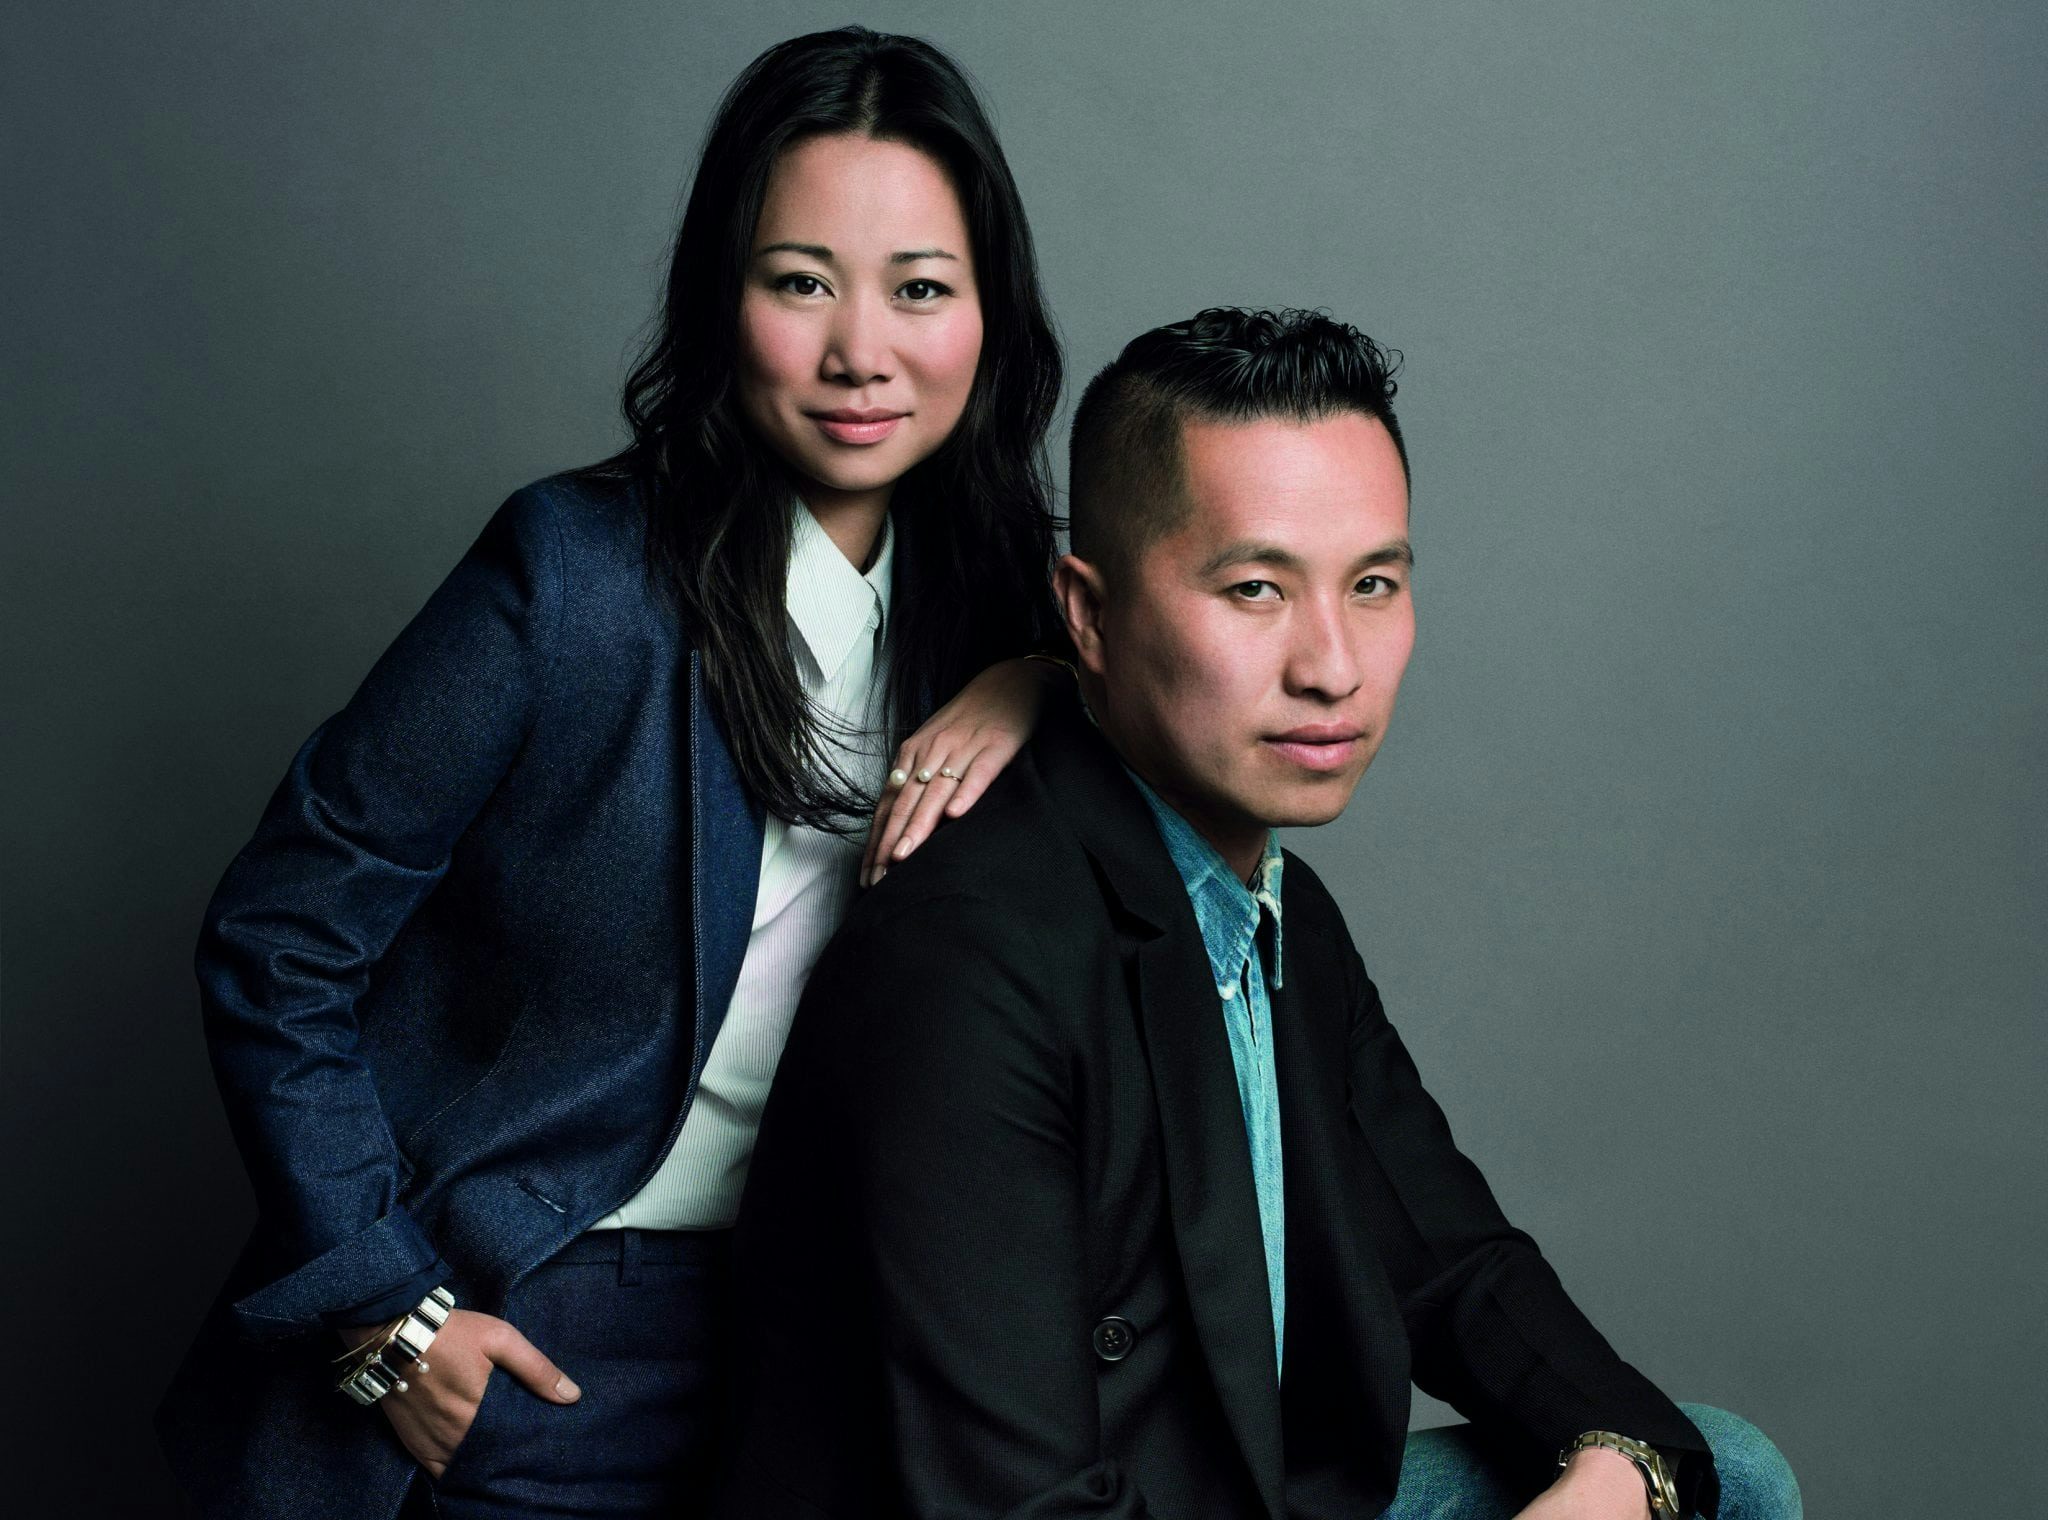 CEO of 3.1 Phillip Lim on Why Moving Slow is the Way to Go in China